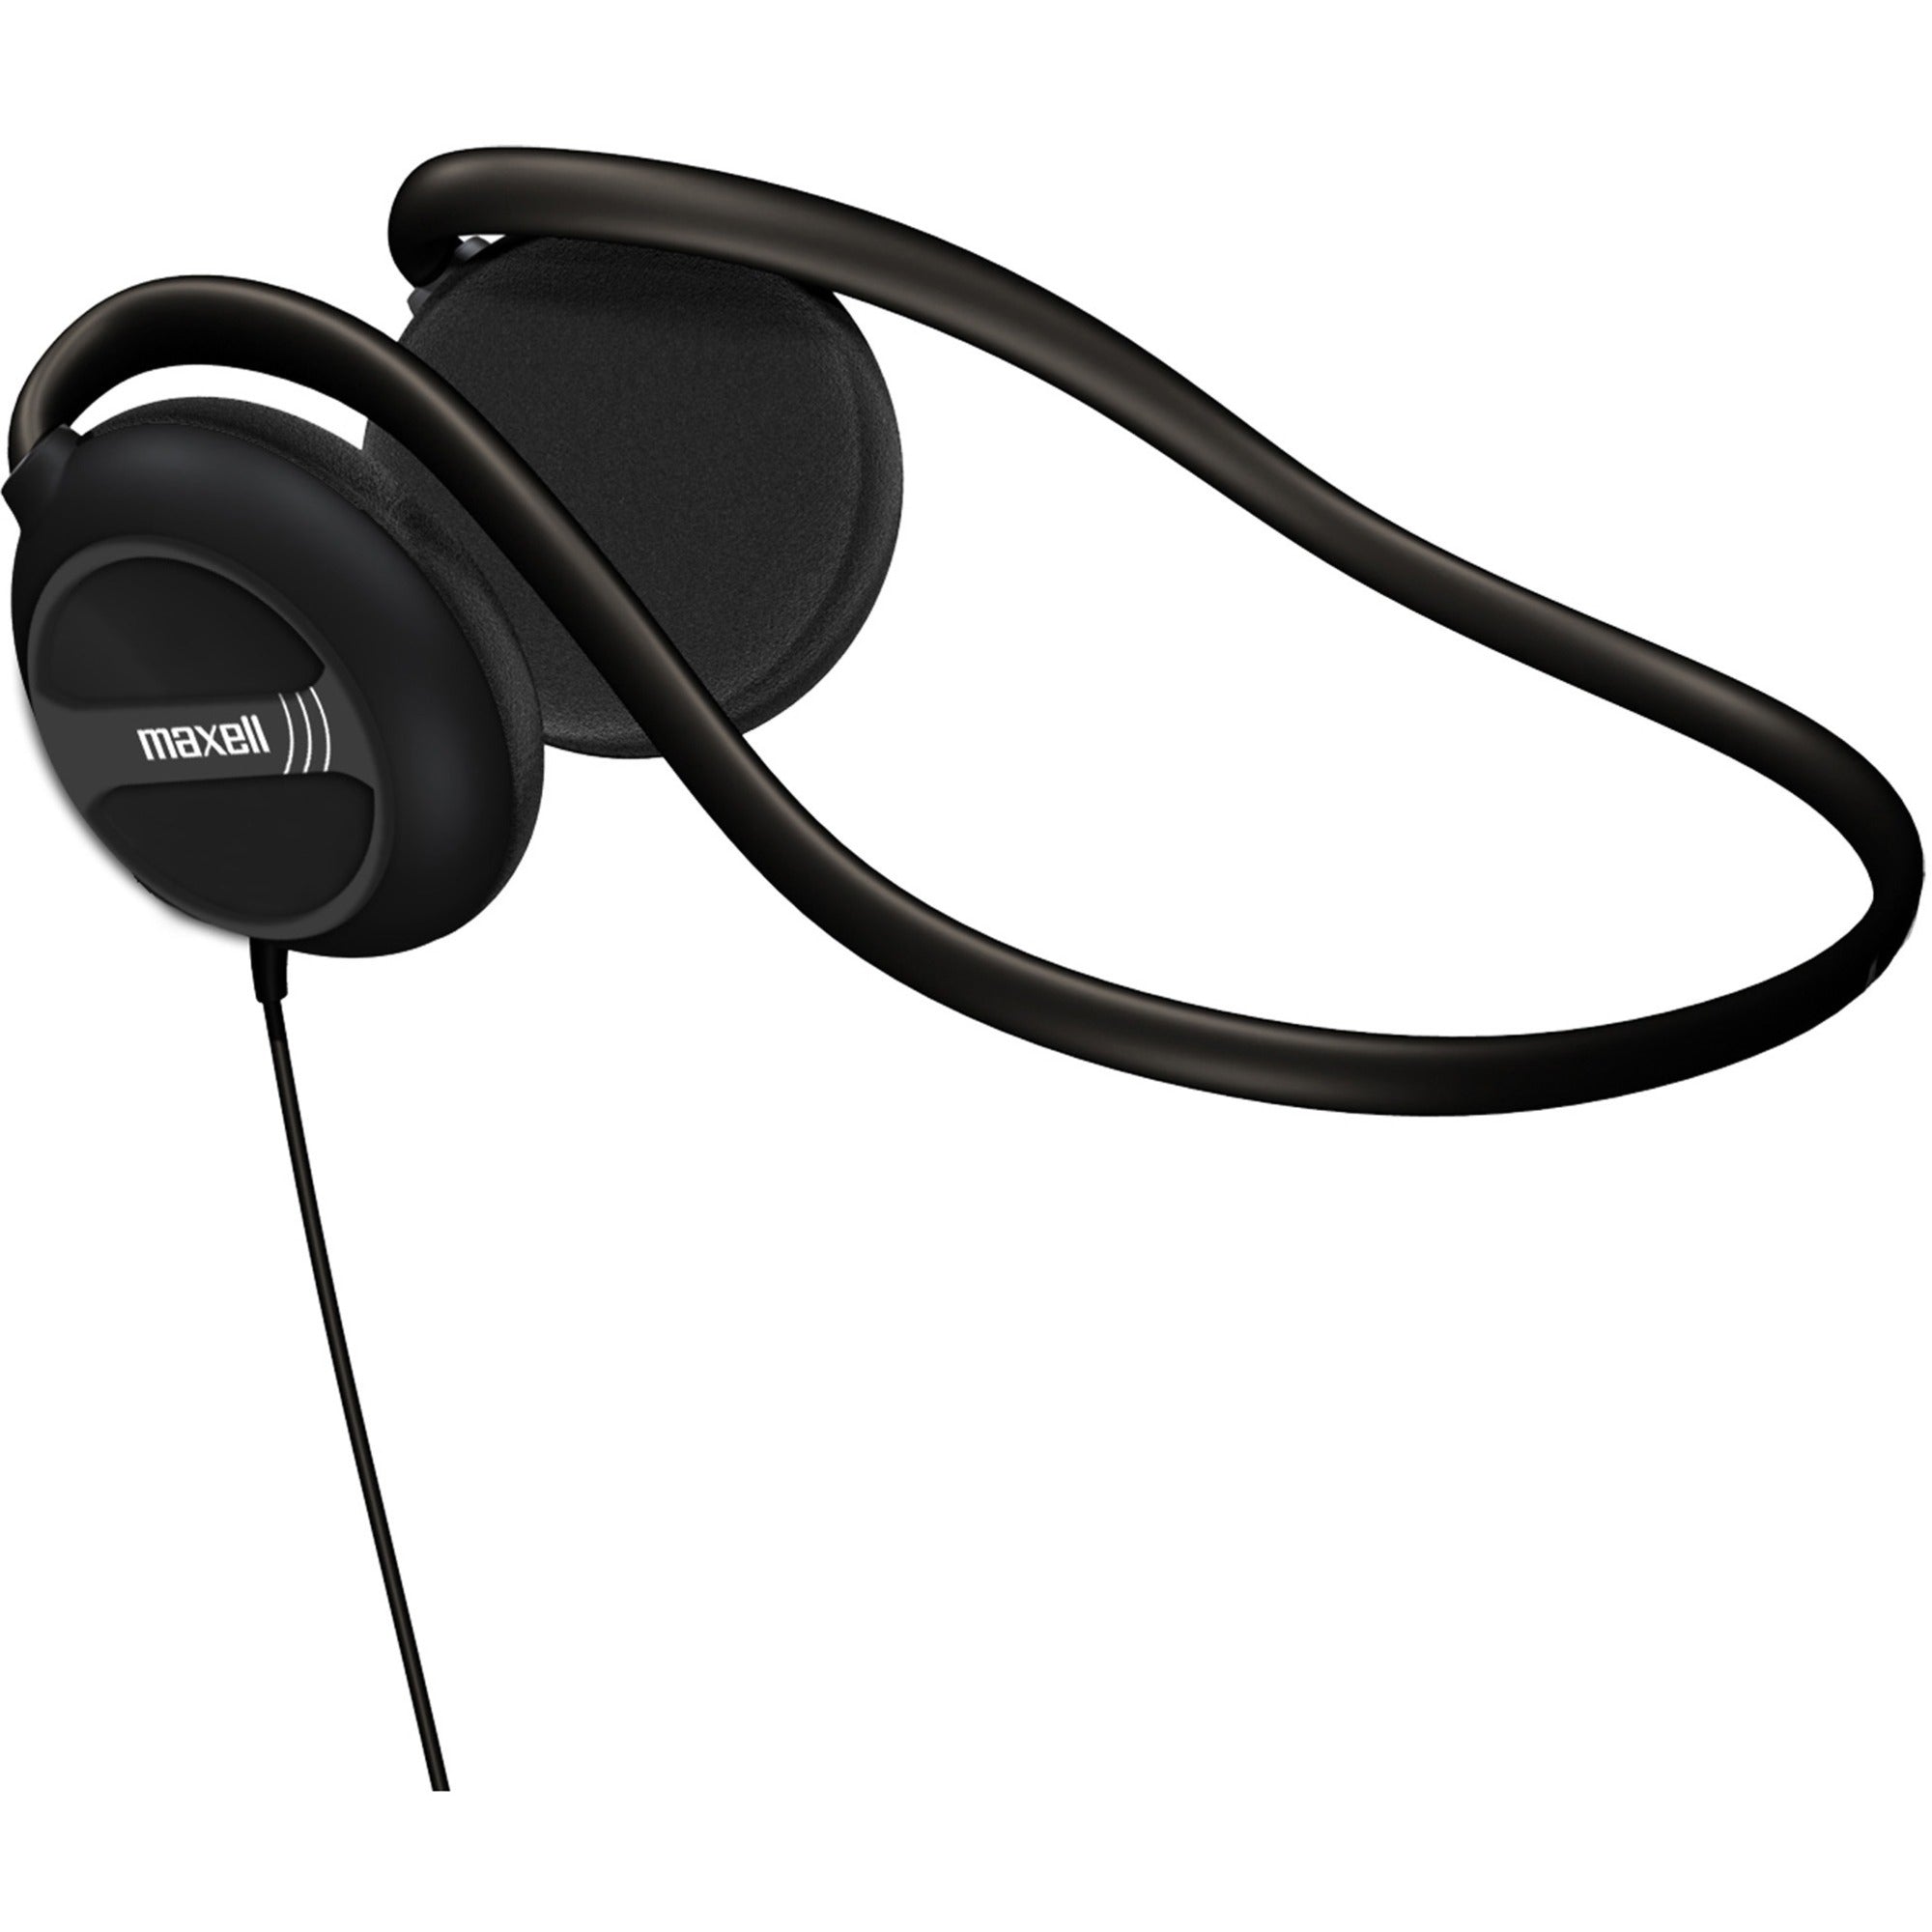 Maxell Stereo Neckbands - Stereo - Black - Mini-phone (3.5mm) - Wired - 32 Ohm - 16 Hz 24 kHz - Nickel Plated Connector - Behind-the-neck - Binaural - Ear-cup - 1 - 